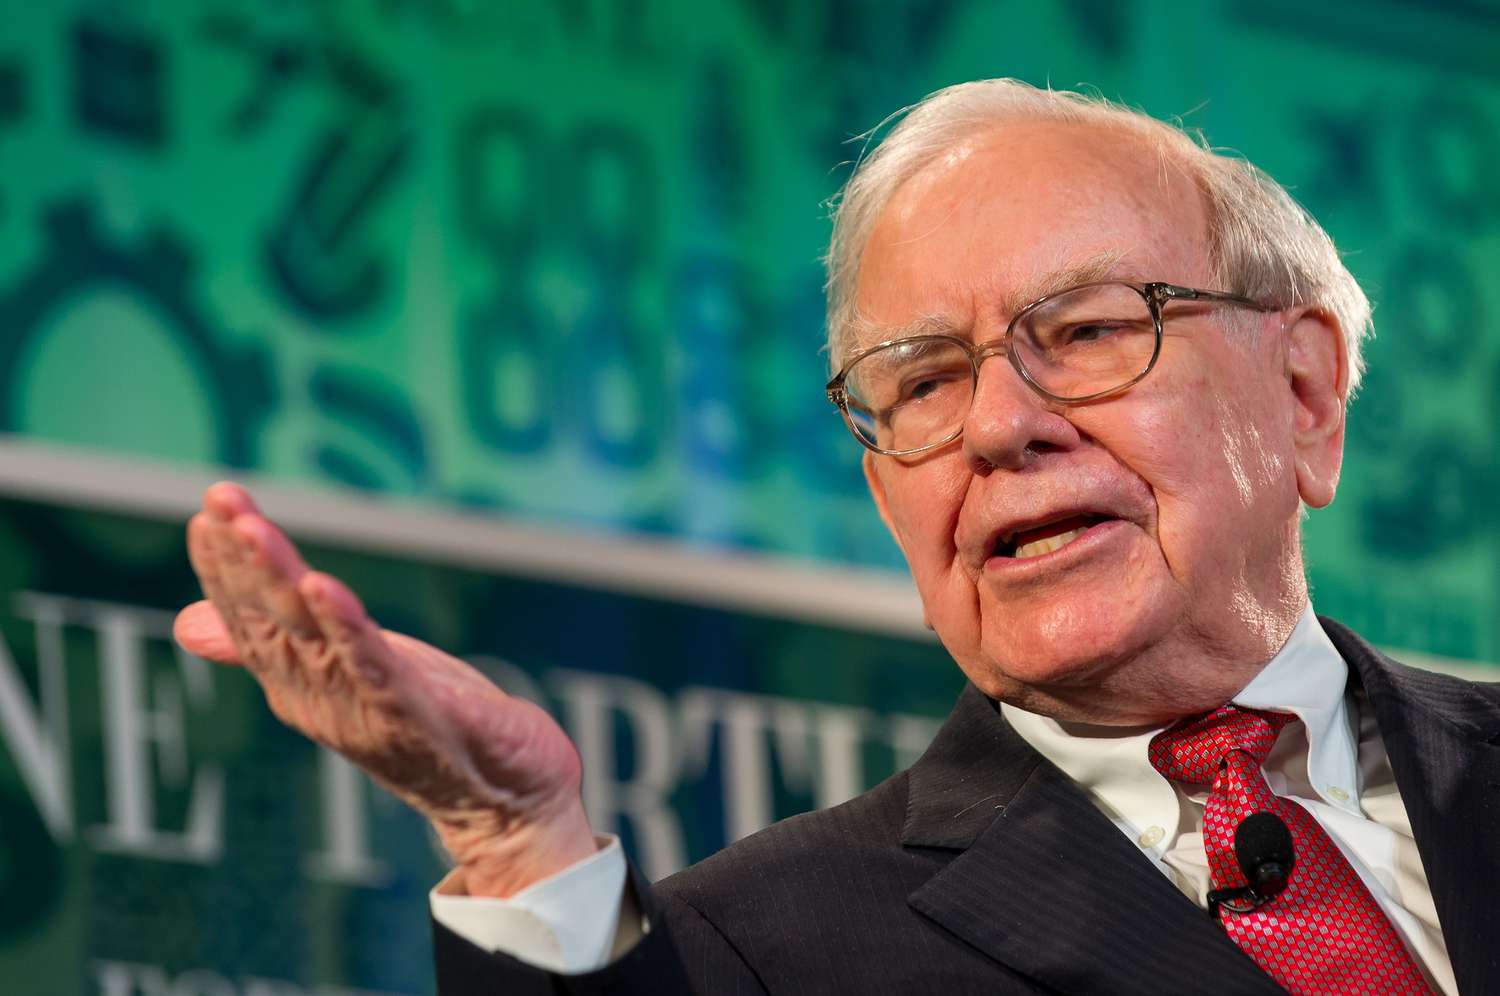 Berkshire Hathaway Q3 Earnings: Surging Profits Amid Record Cash Pile